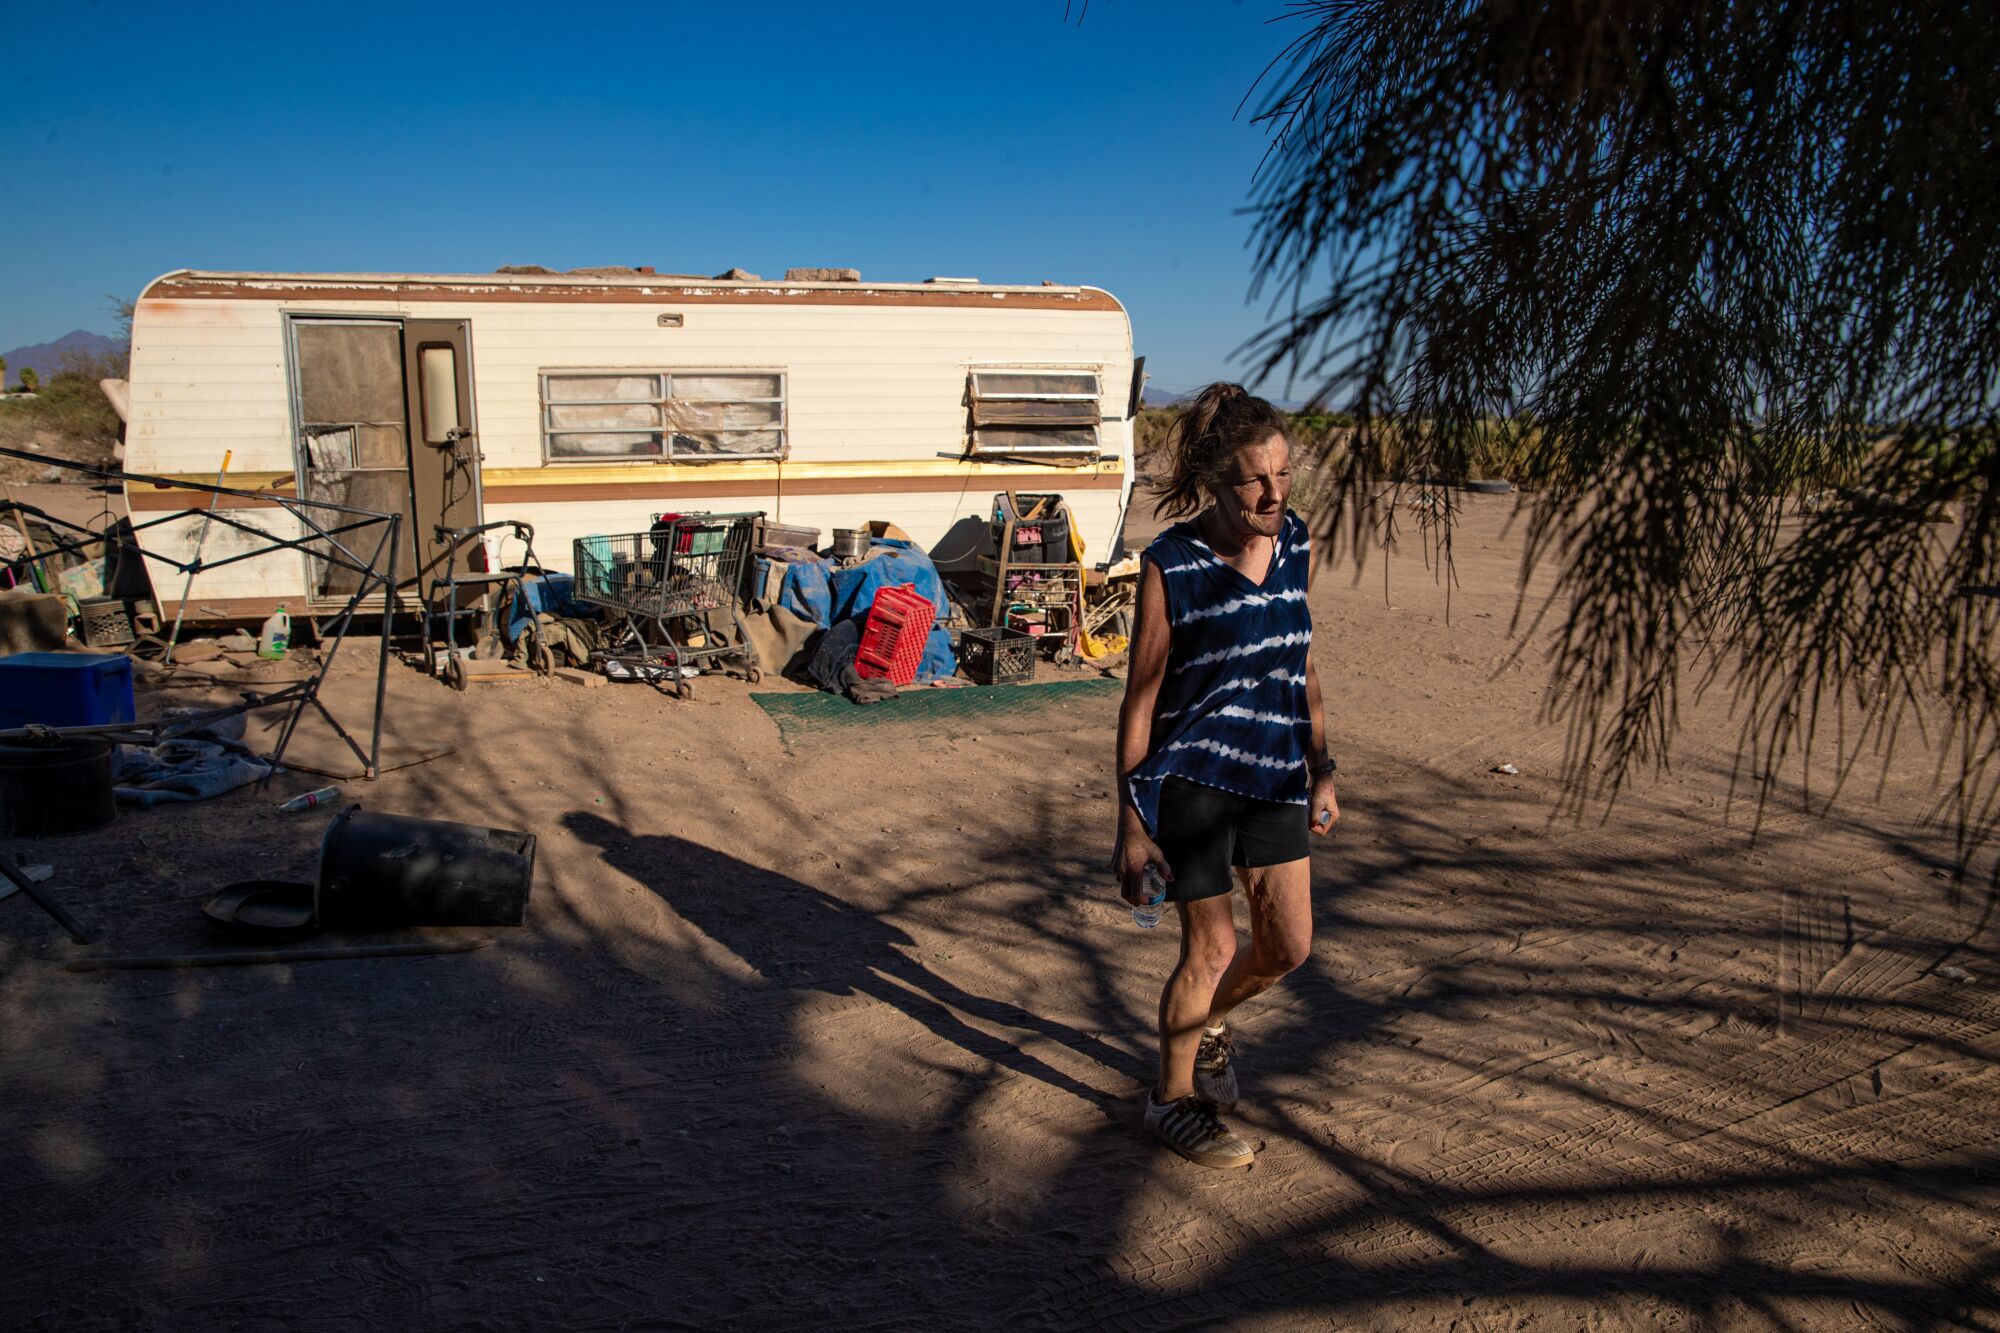 Abby Mitchell back at the homeless encampment in Blythe